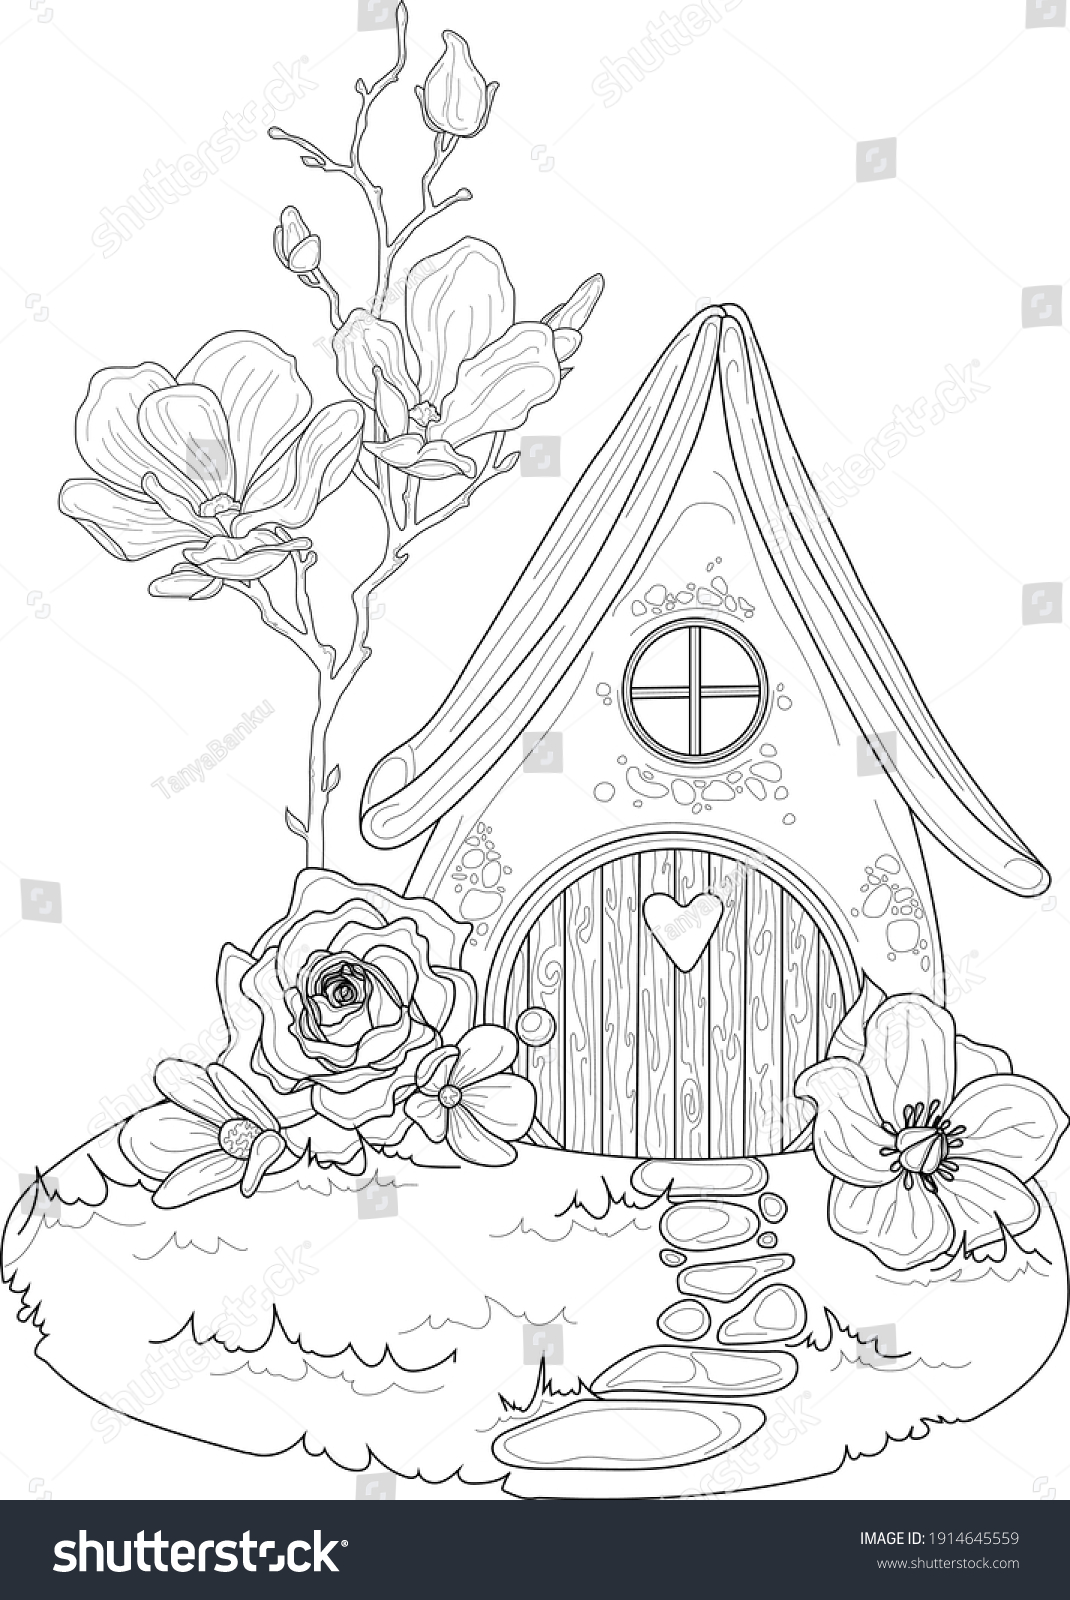 SVG of Cartoon fantasy graphic elf house with roses and magnolia flowers sketch template. Magic hobbit home vector illustration in black and white for games, decor. Coloring paper, page, story book, print svg